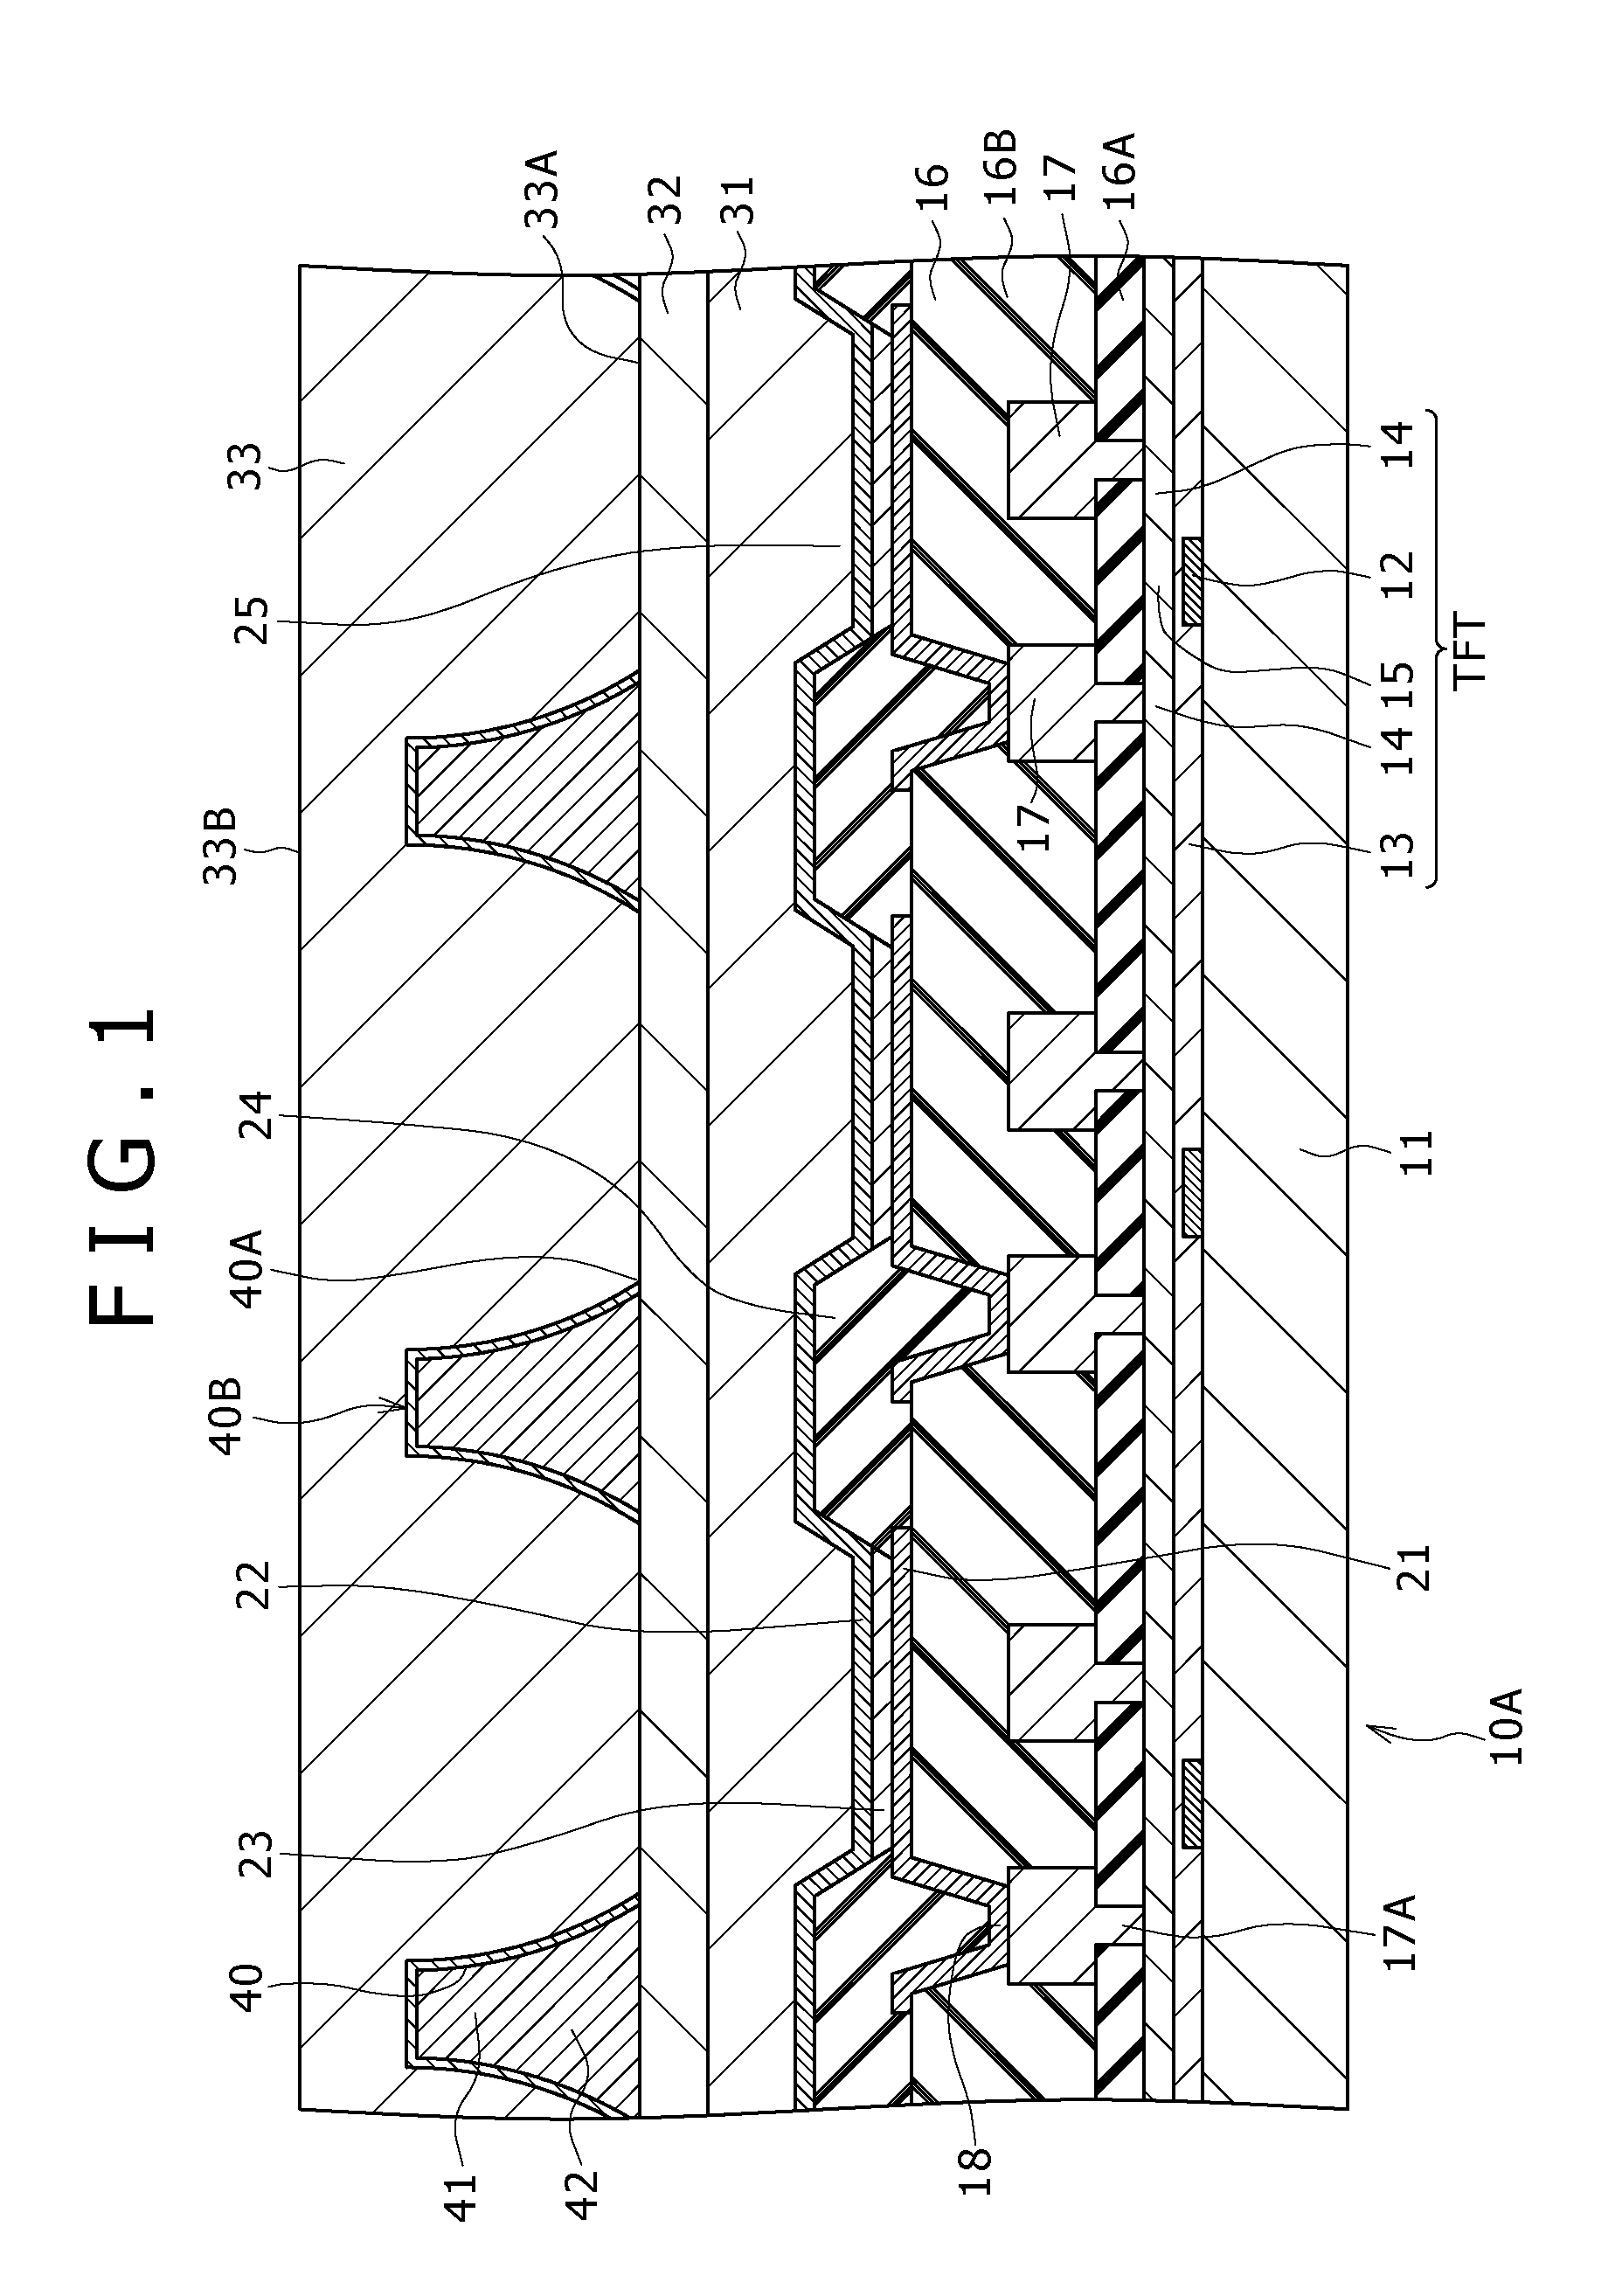 Display device having parabolic light reflecting portions for enhanced extraction of light